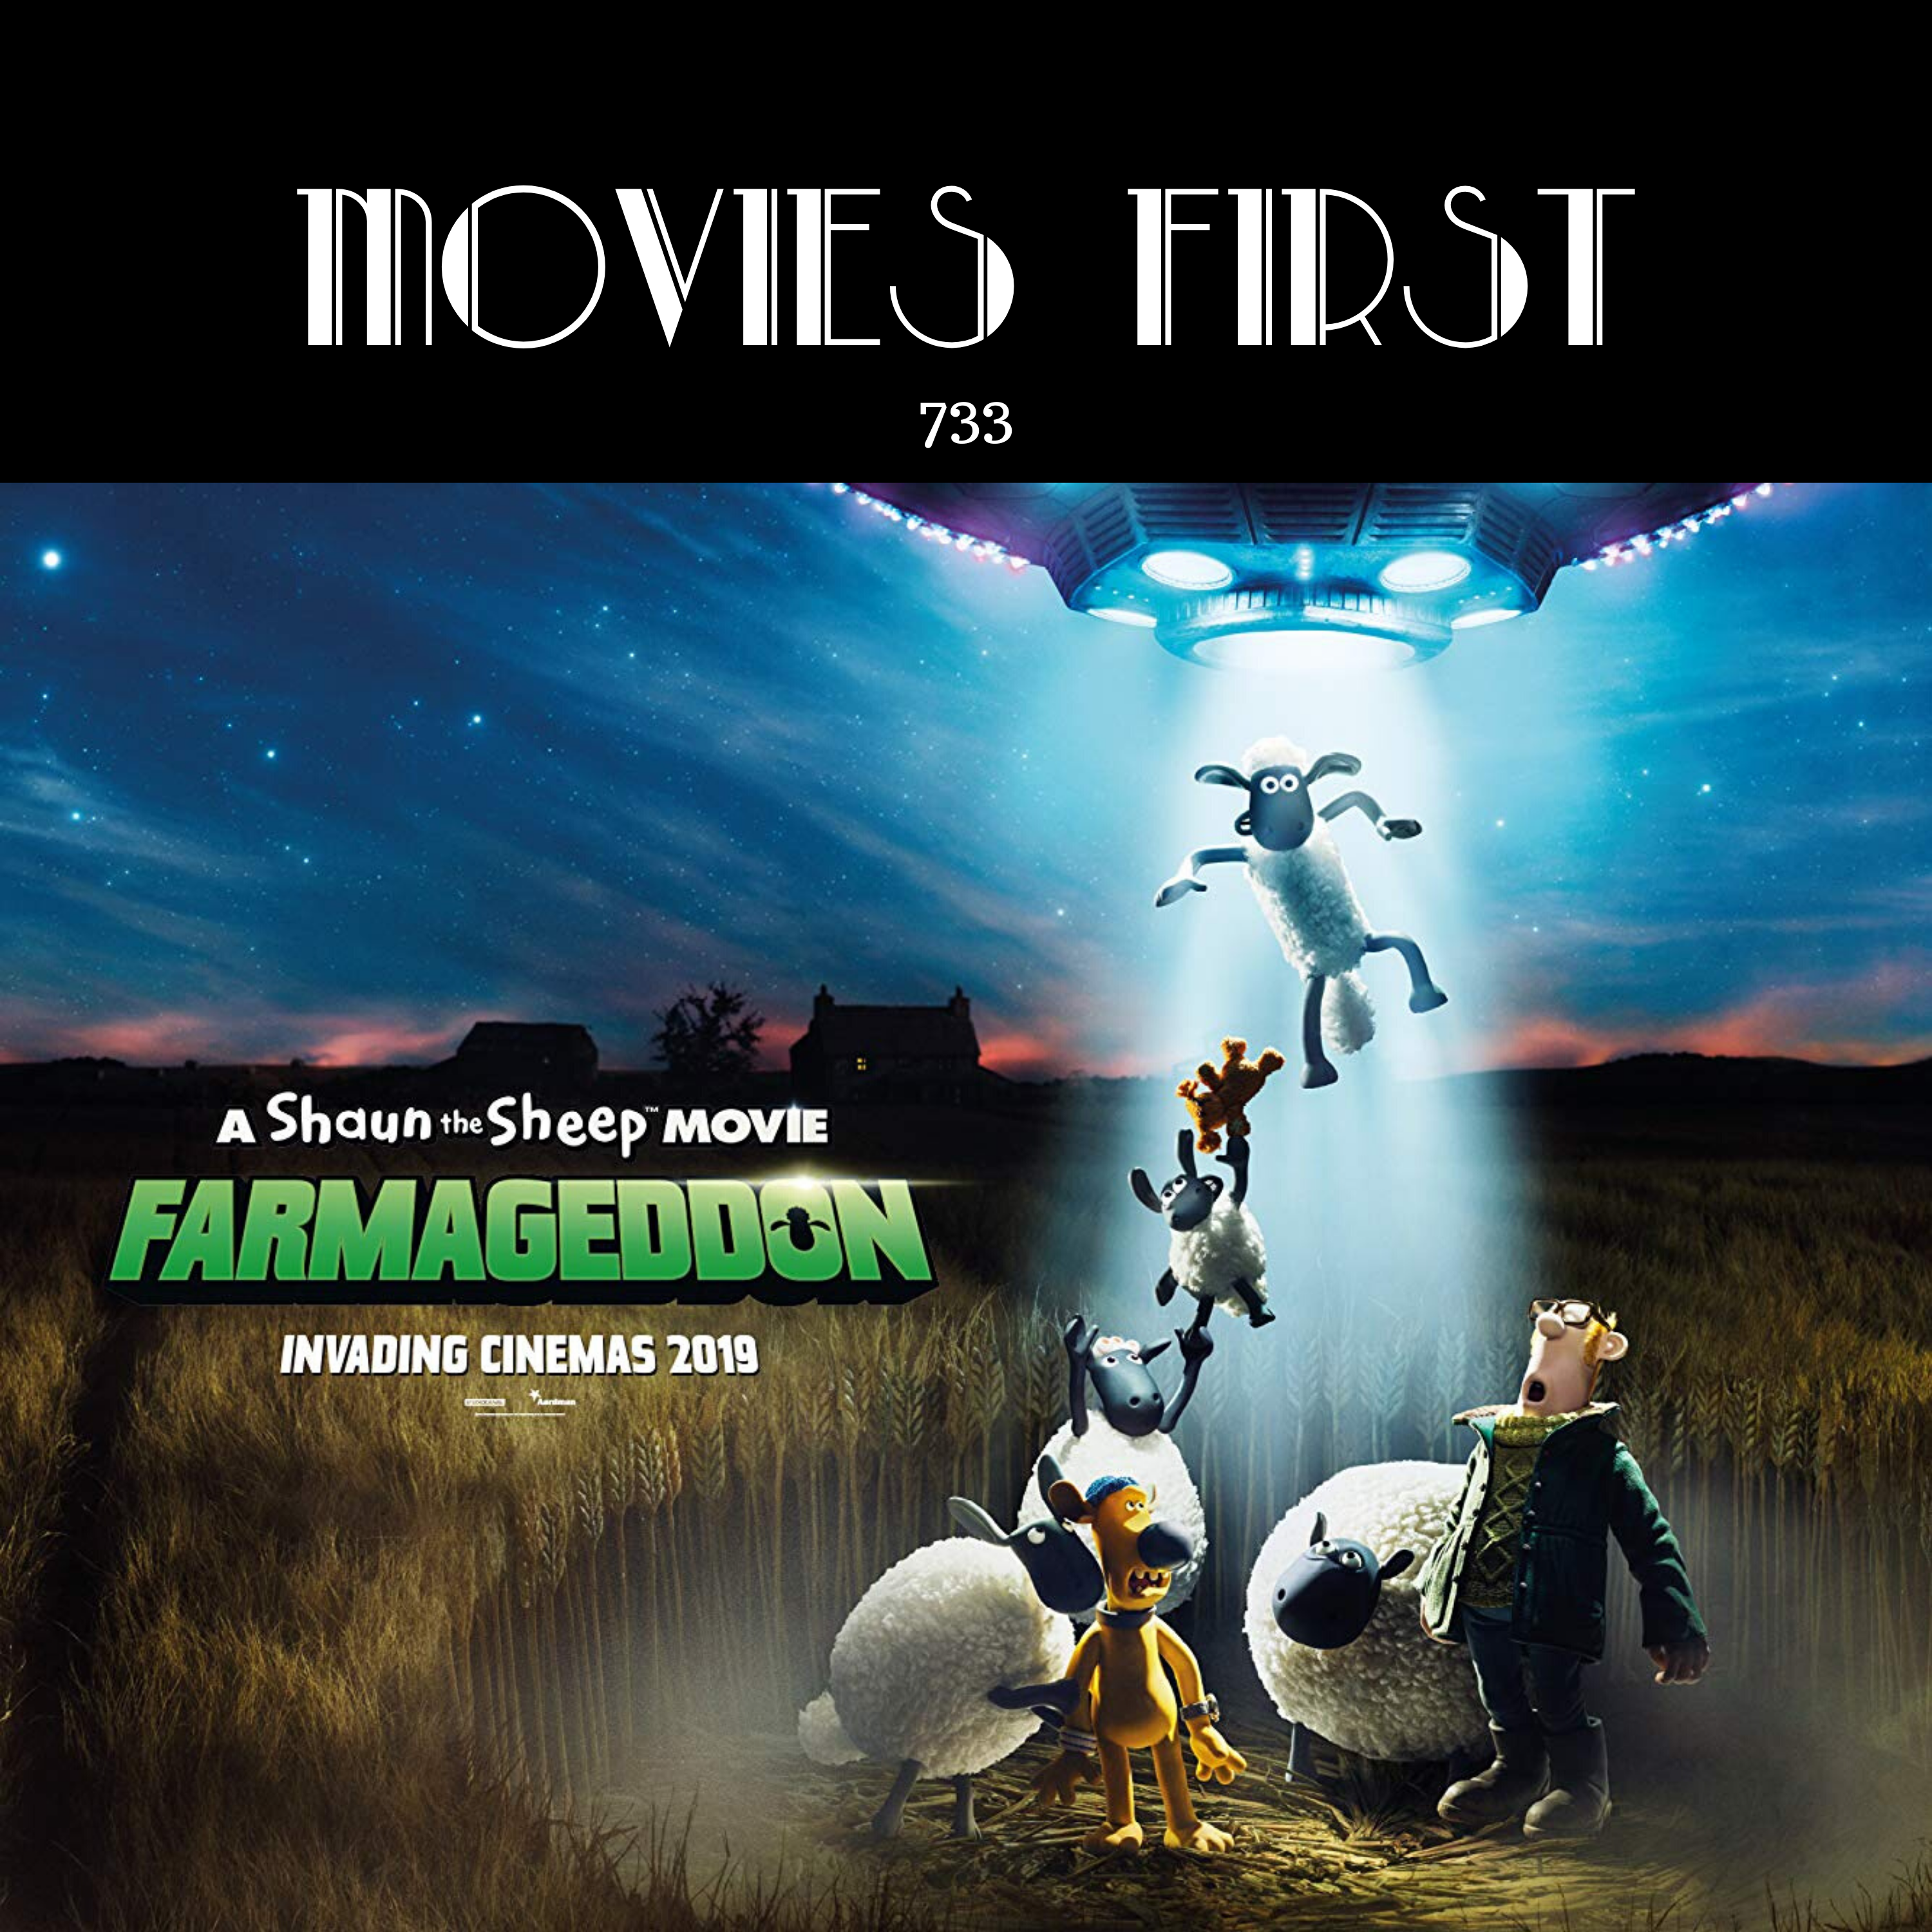 733: A Shaun the Sheep Movie: Farmageddon (Animation, Adventure, Comedy)(the @MoviesFirst review)